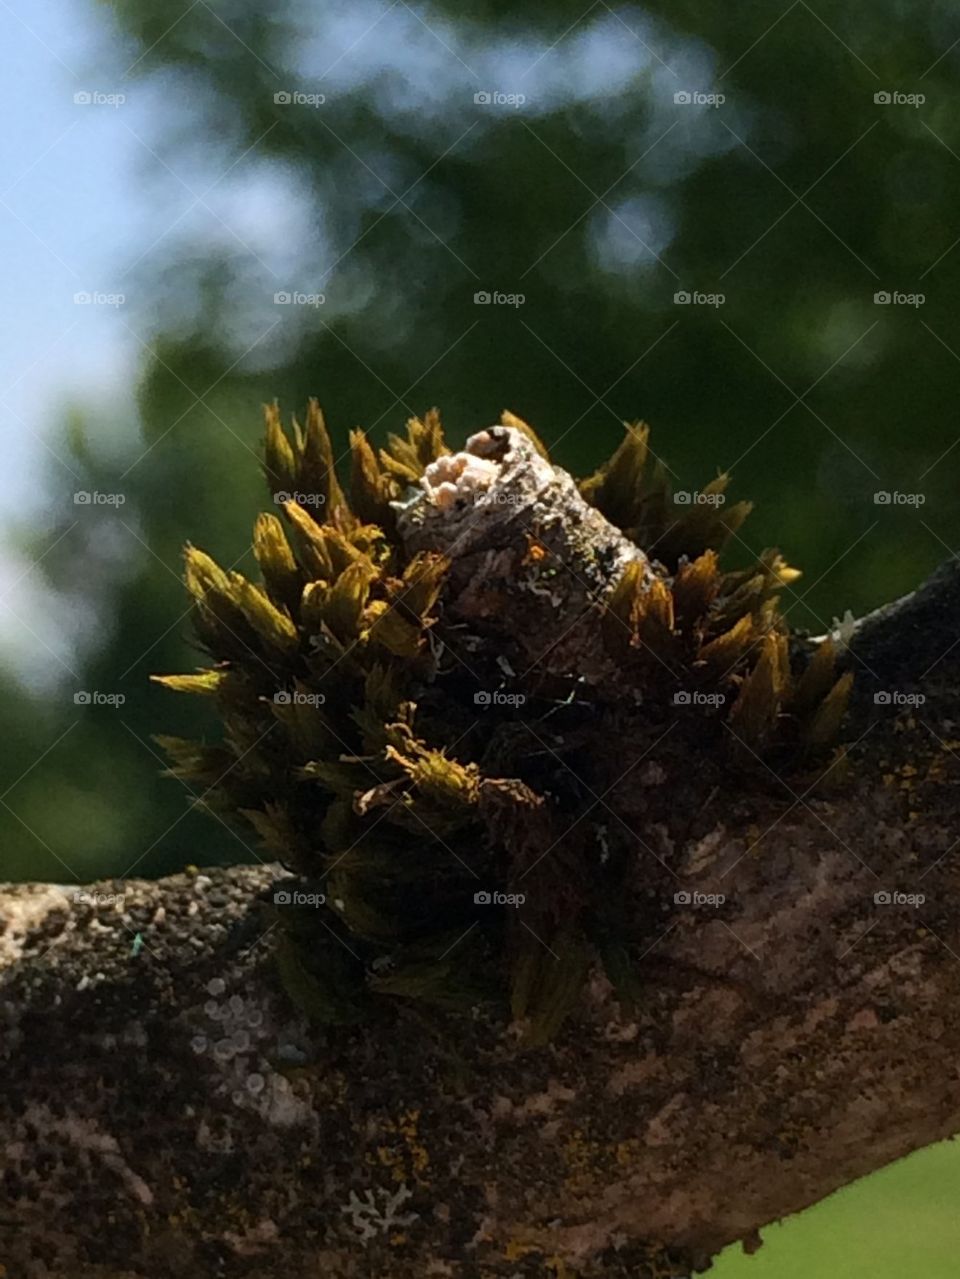 Moss on a tree branch